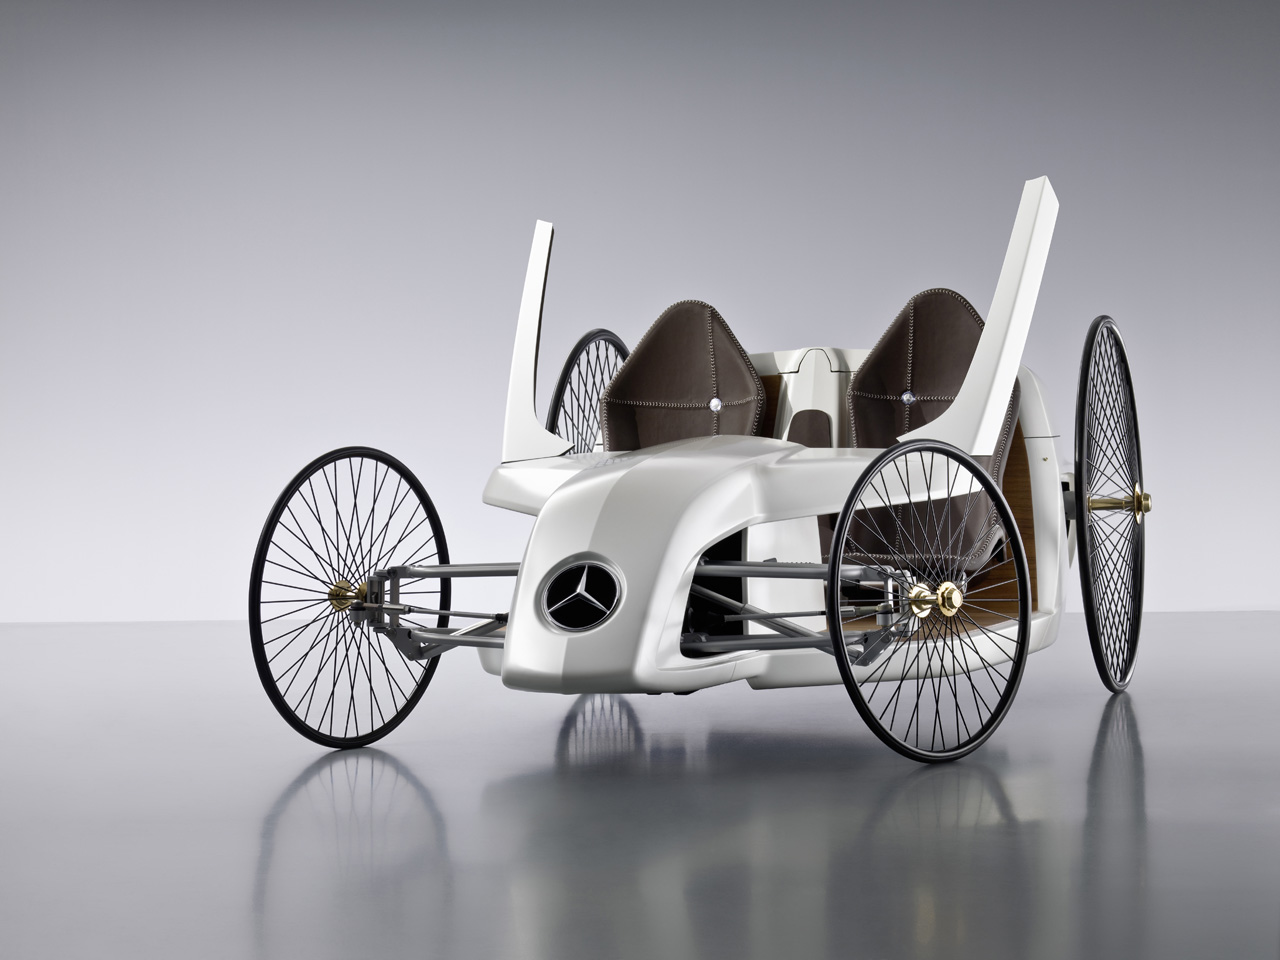 Mercedes-Benz F-Cell Roadster Concept, 2009